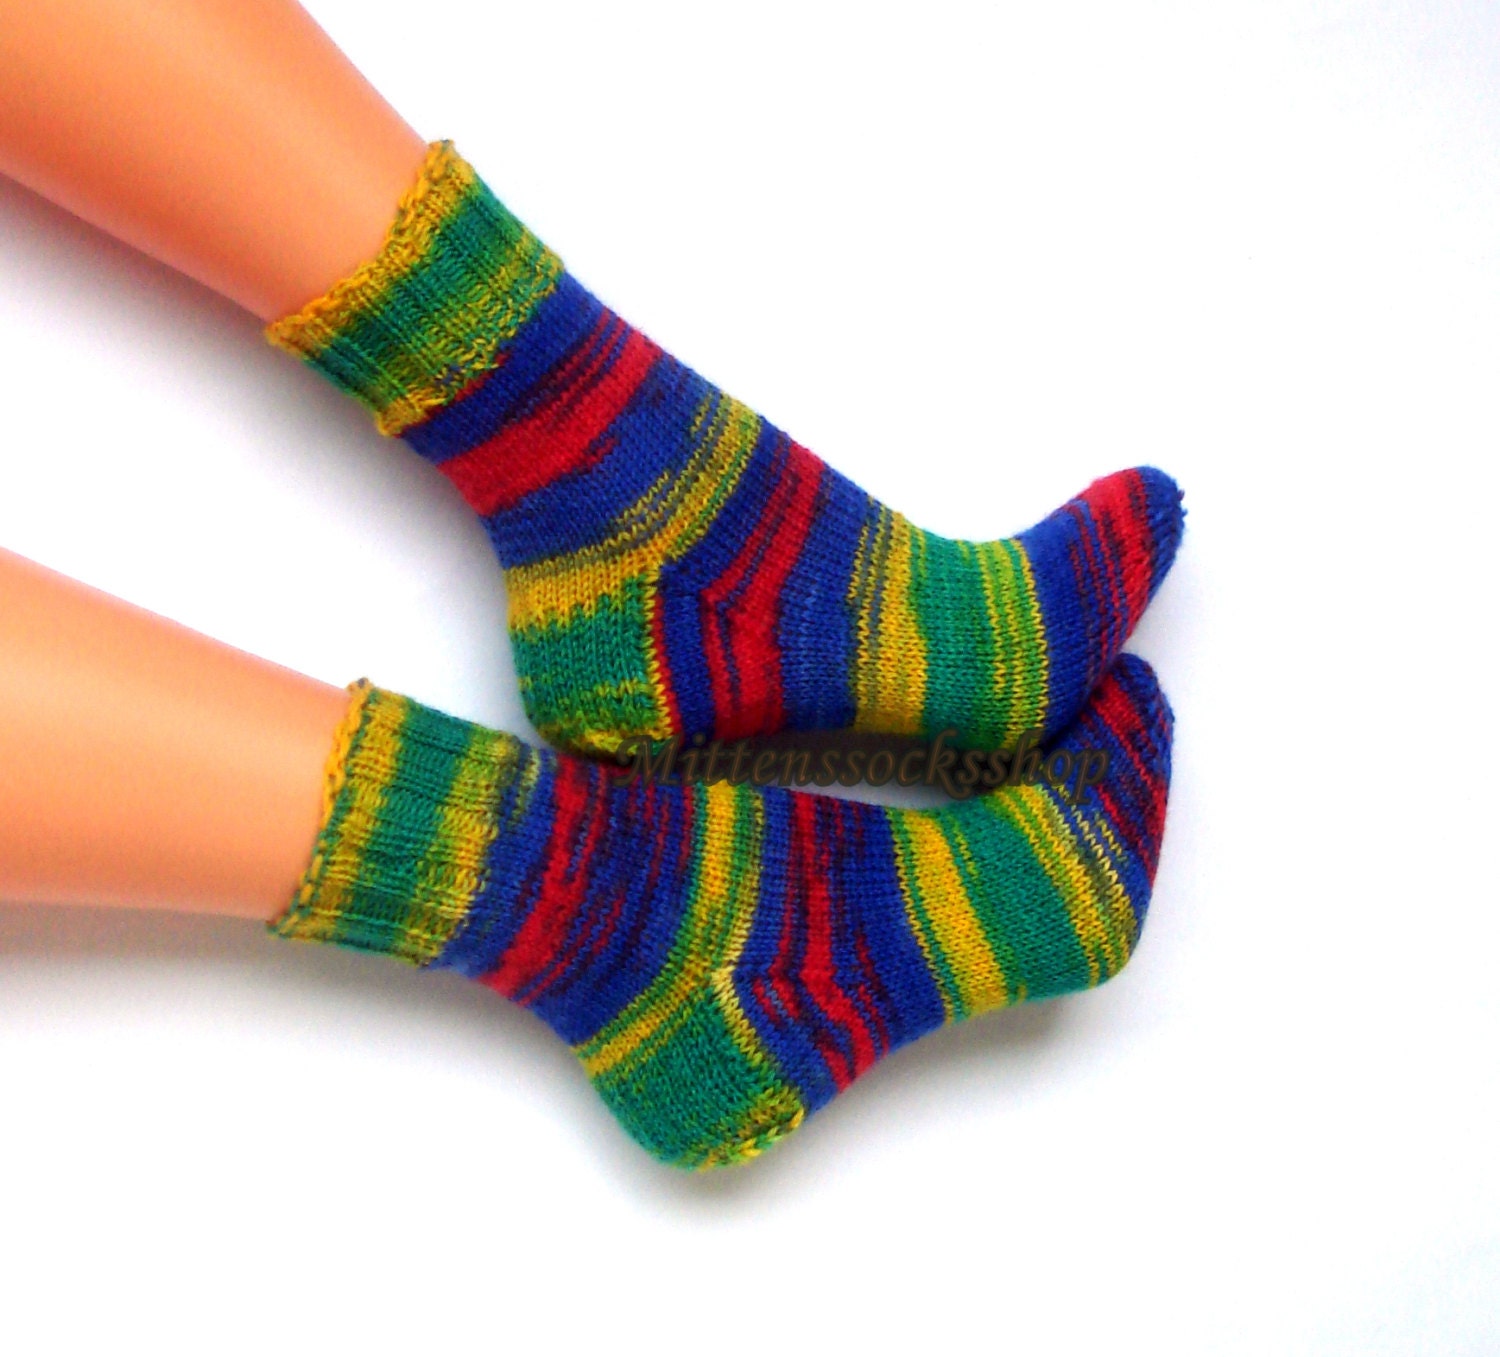 Blue Green Red Yellow Socks Hand Knitted Women's Colorful Girl's Bright Striped Gift Idea 2021